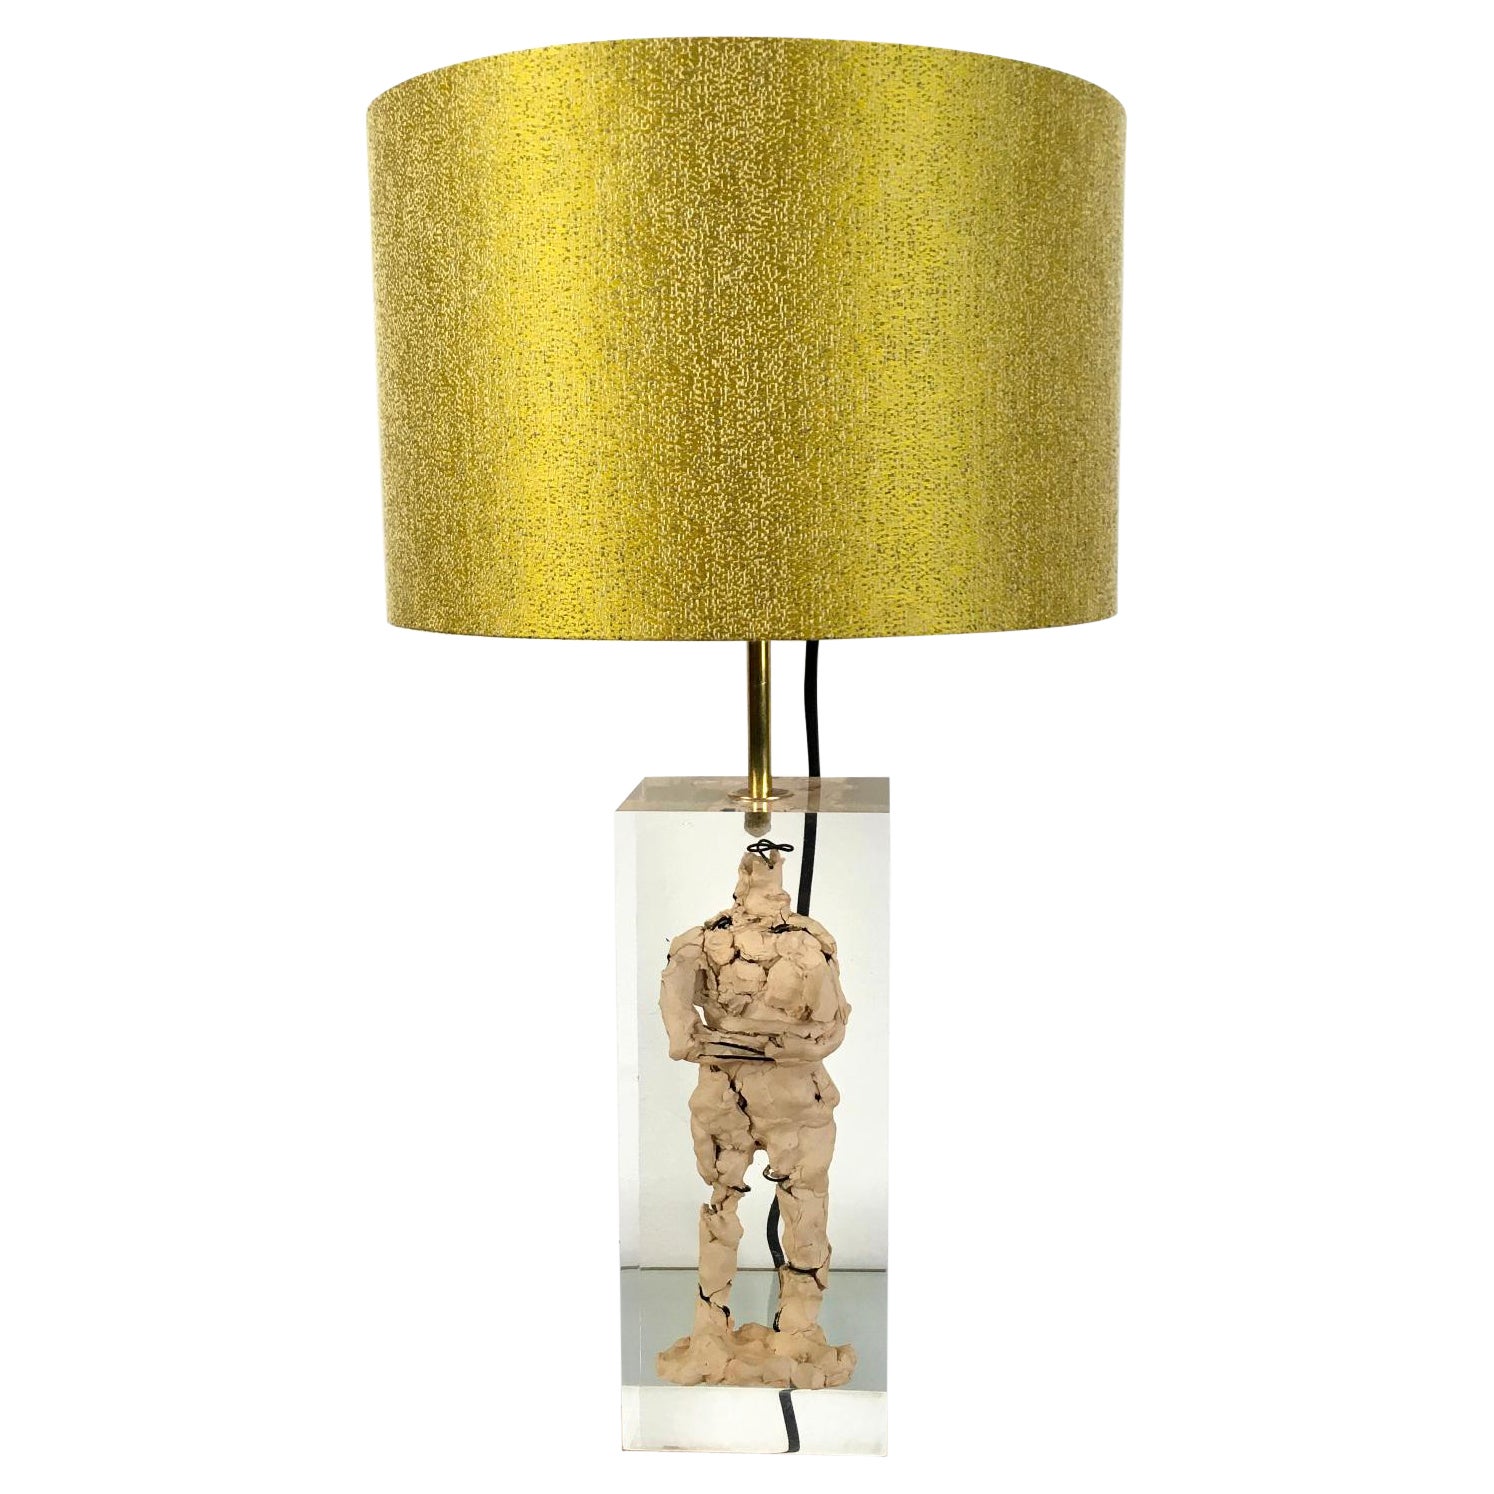  Lucite Table Lamp in a Manner of Maison Romeo Paris 1980s